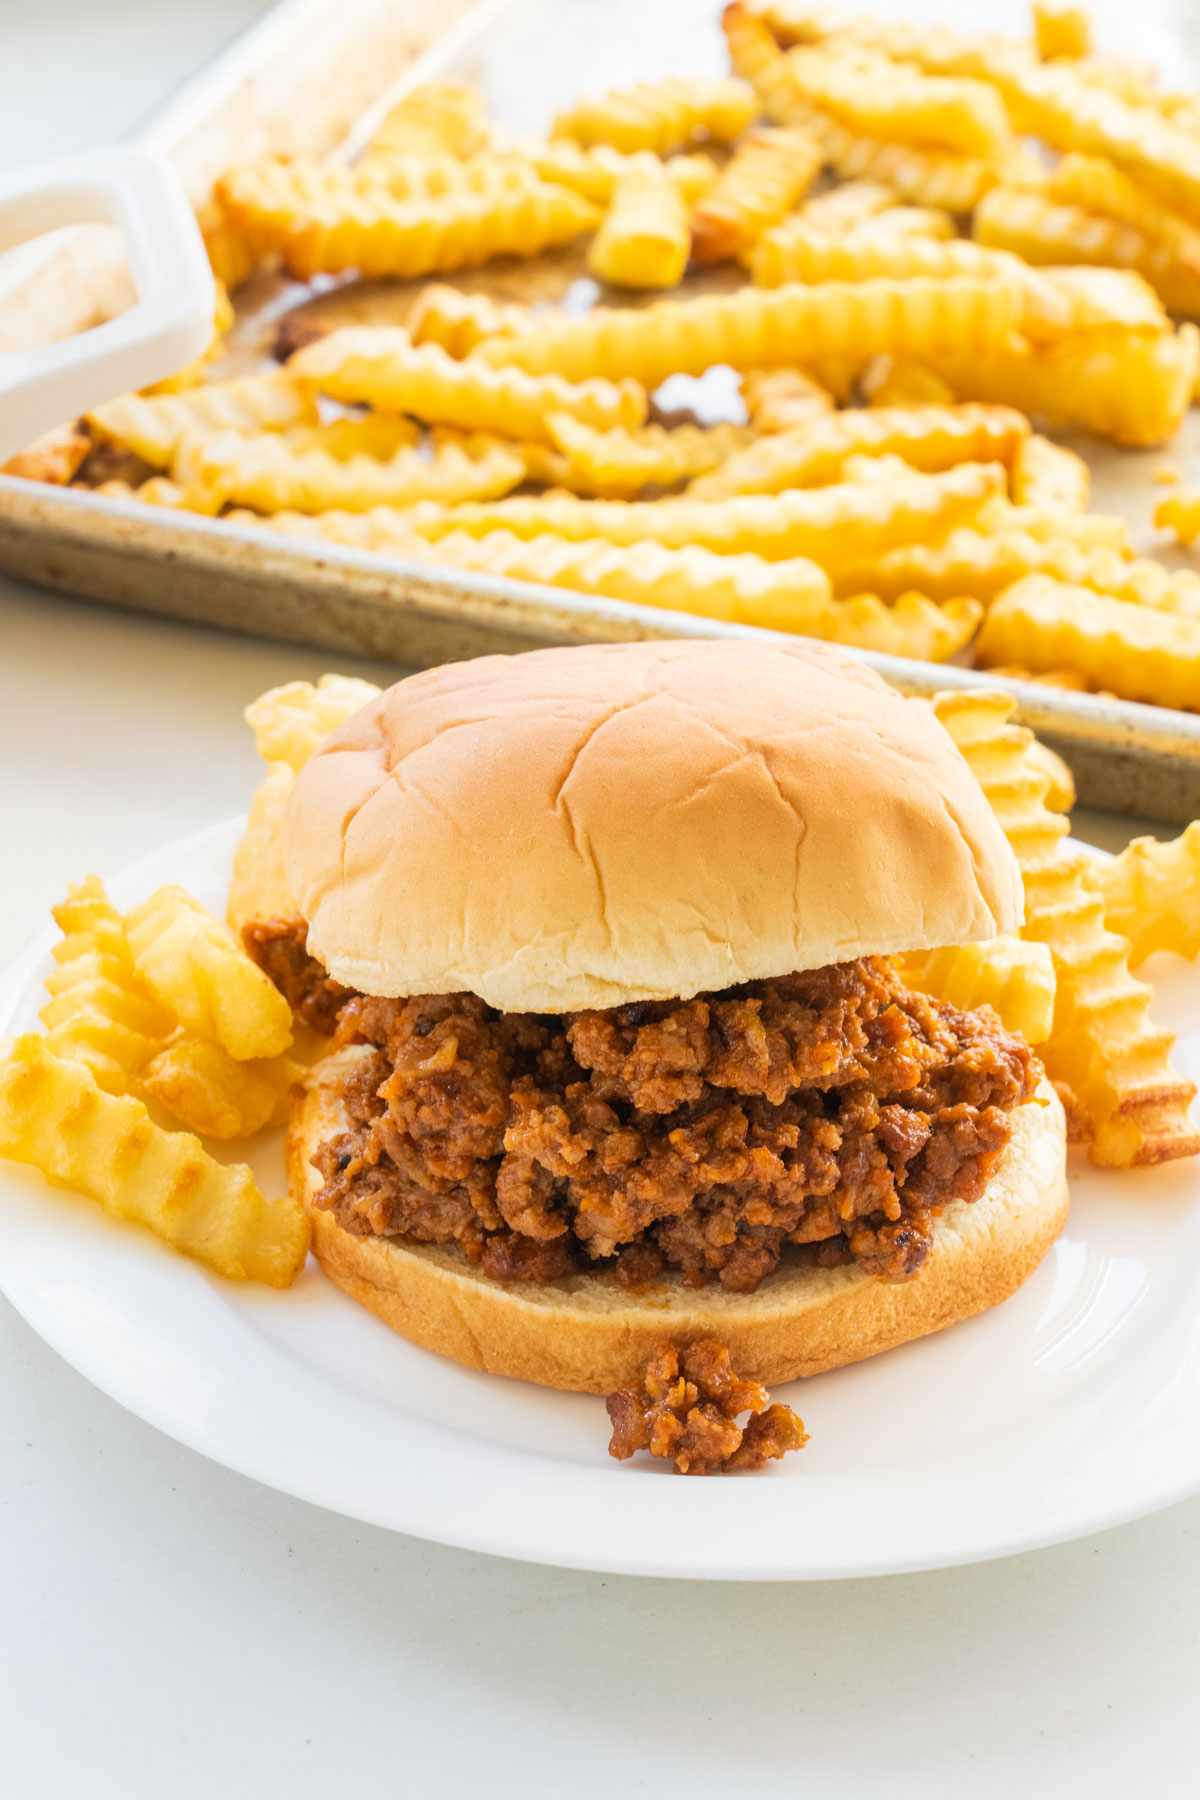 Homemade Sloppy Joes - Best Crafts and Recipes